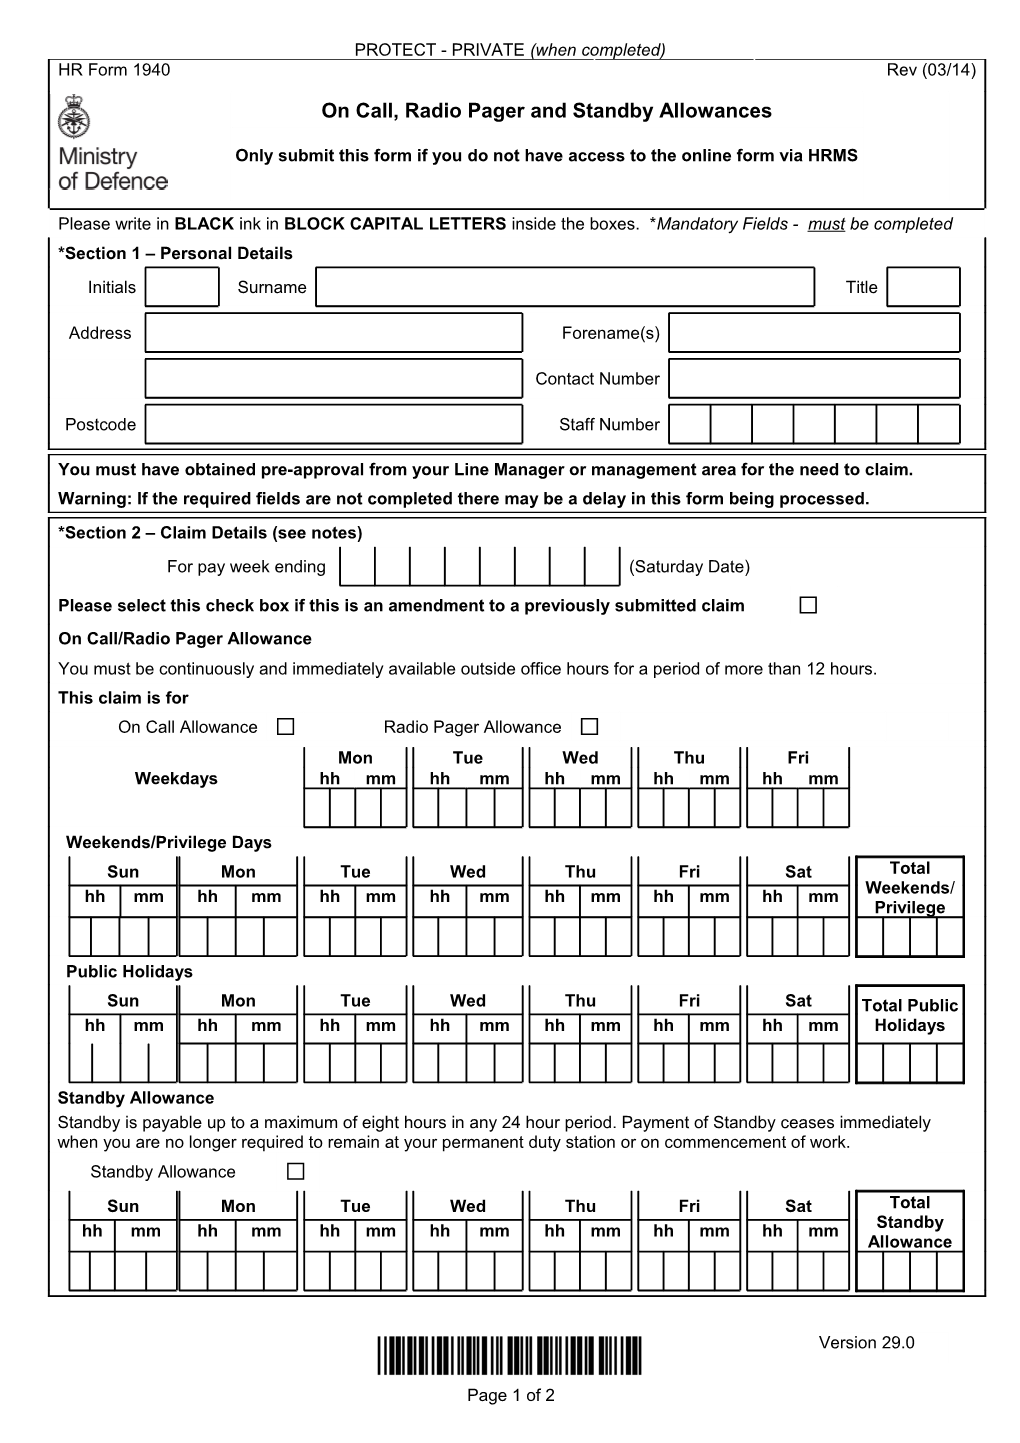 HR Form 1940: on Call, Radio Pager and Standby Allowances